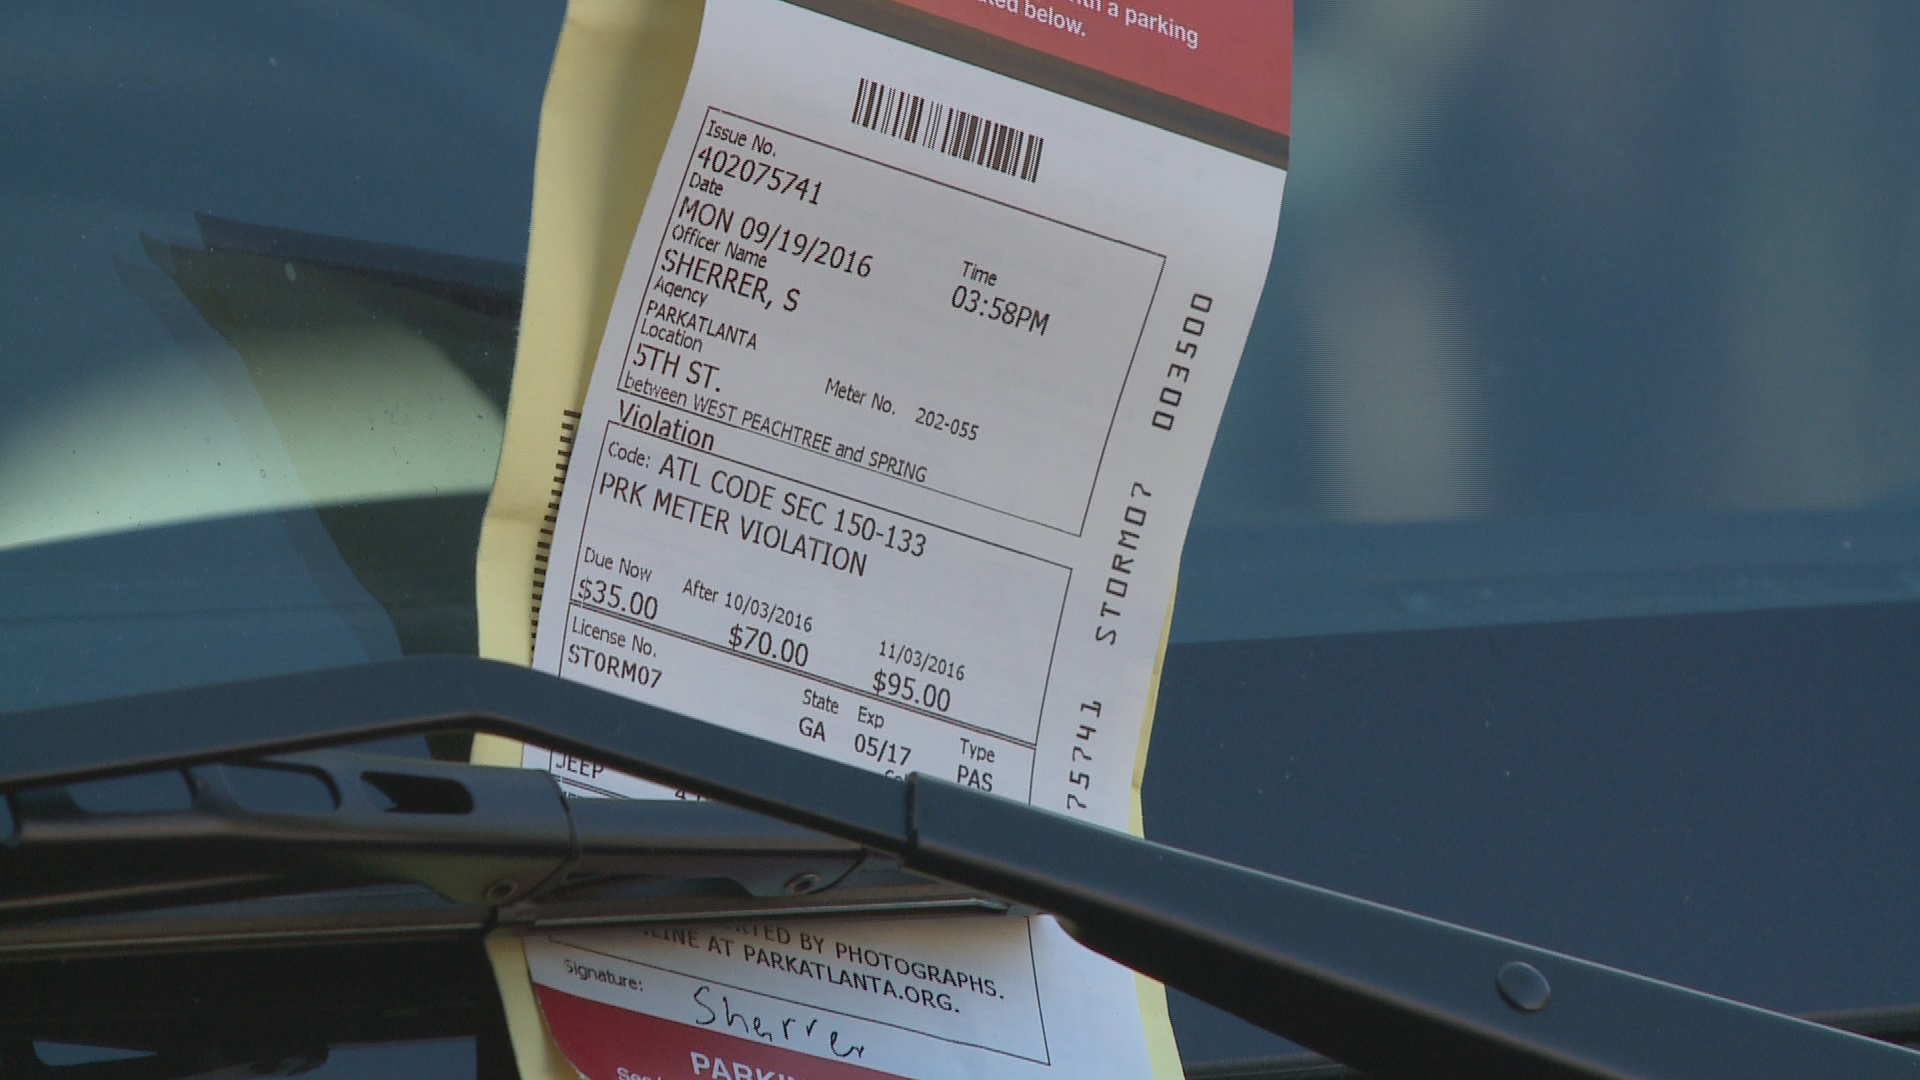 11alive.com | Did you get your parking ticket in one of the city's enforcement hot spots?